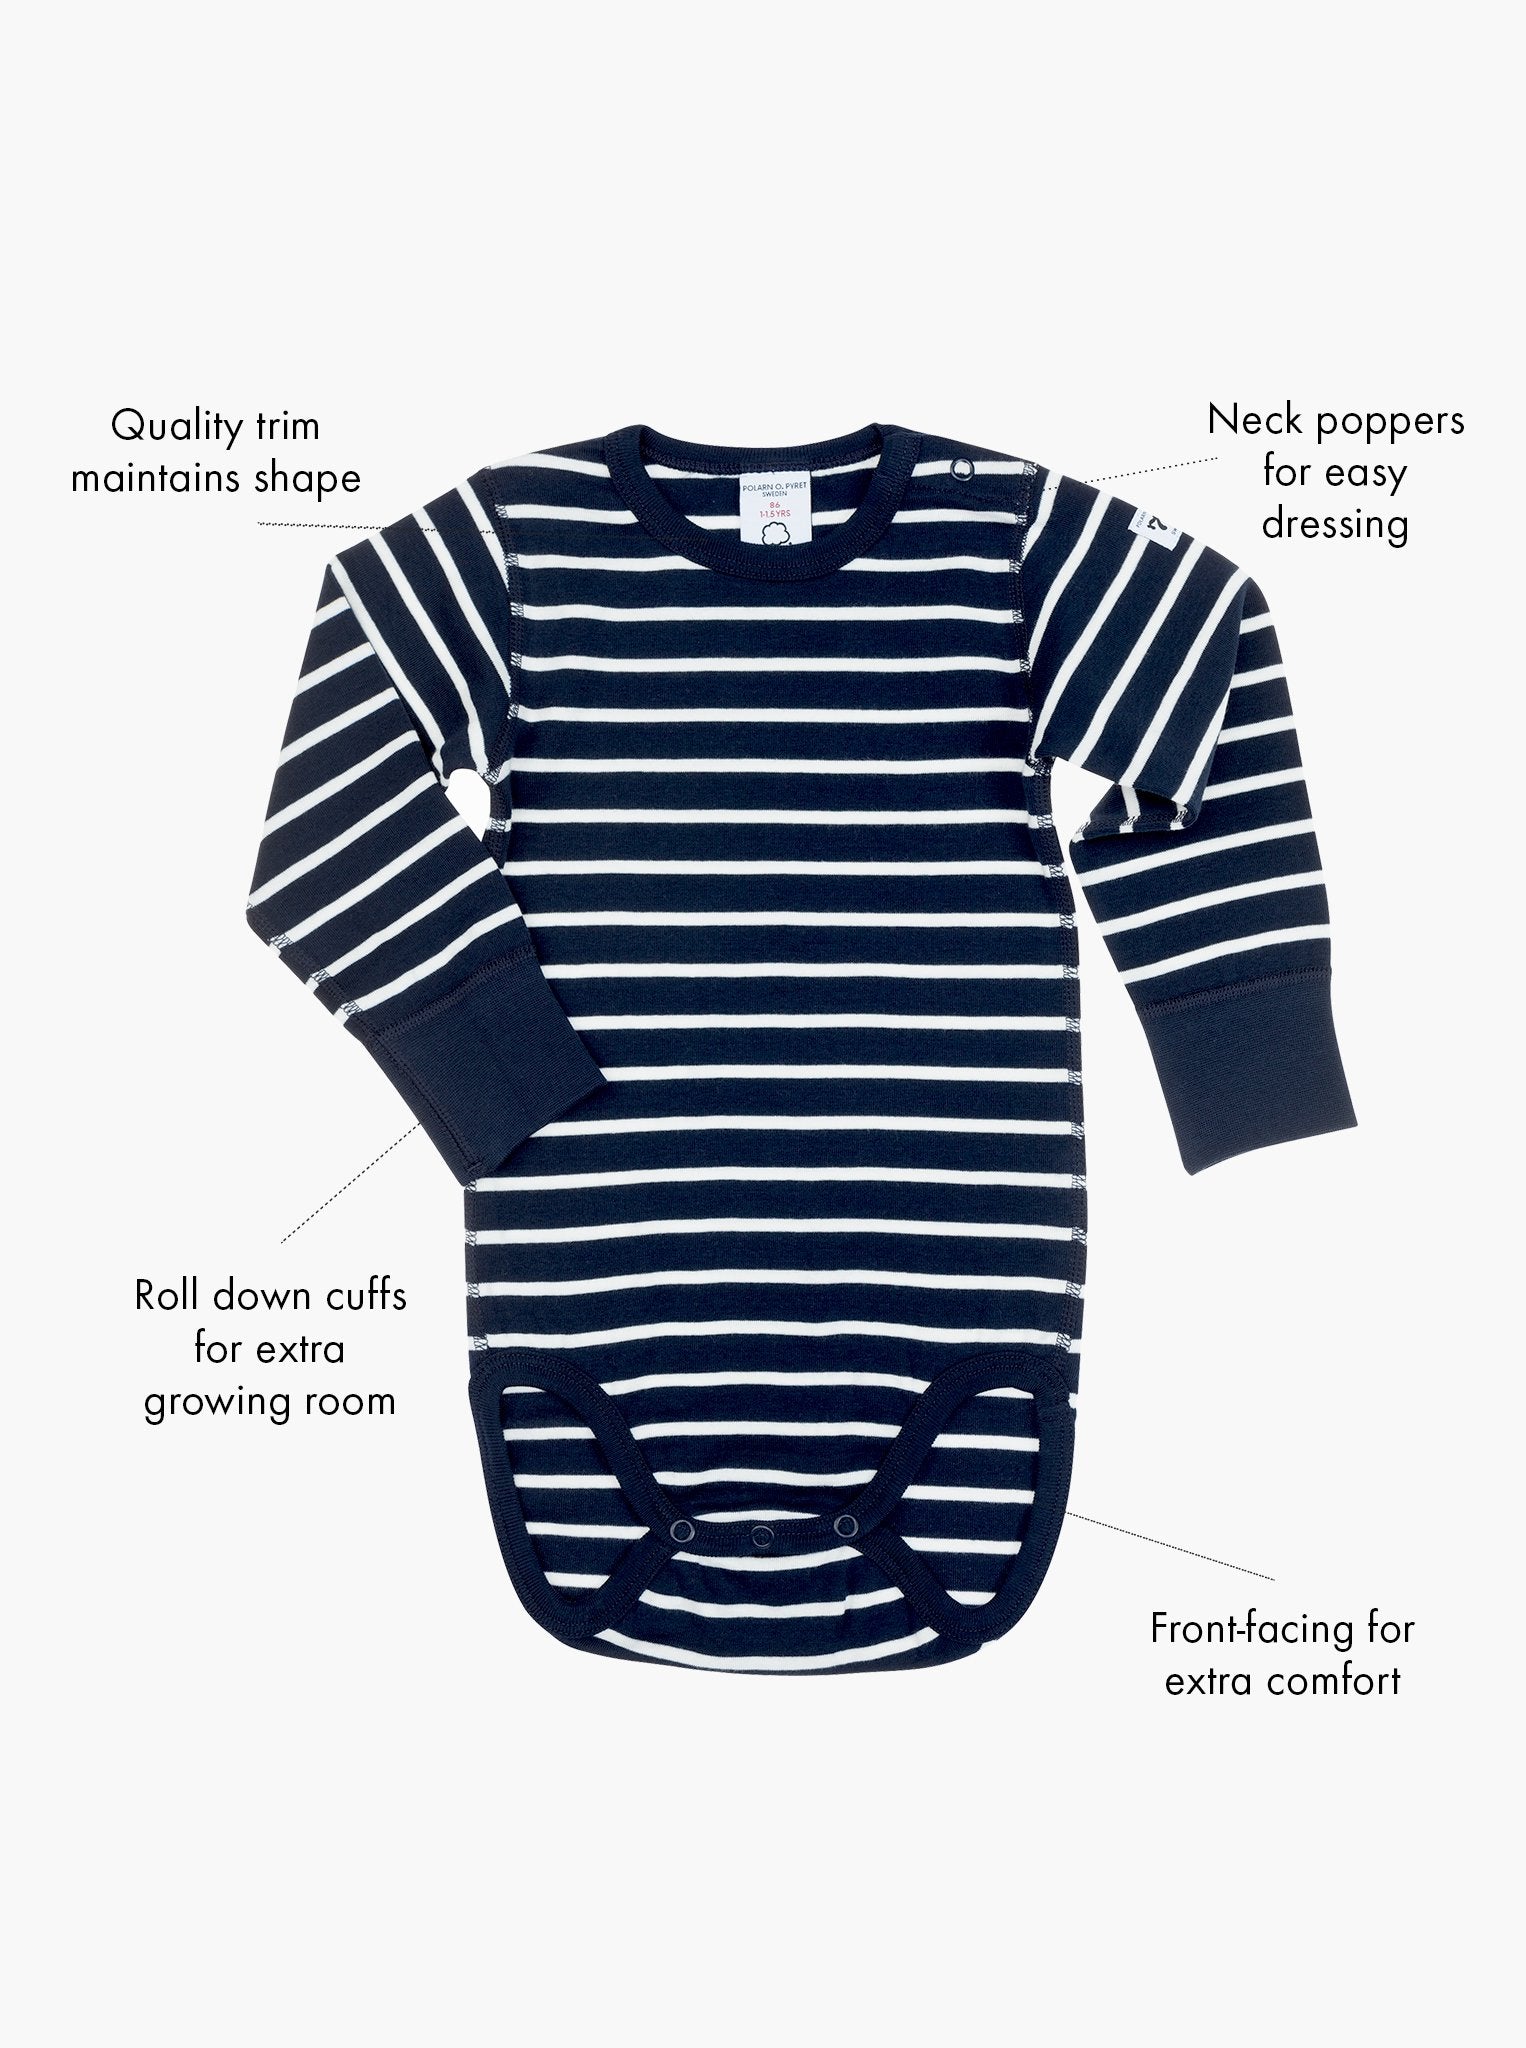 newborn babygrow navy stripes, ethical quality organic cotton, polarn o. pyret classic with features shown as text labels.